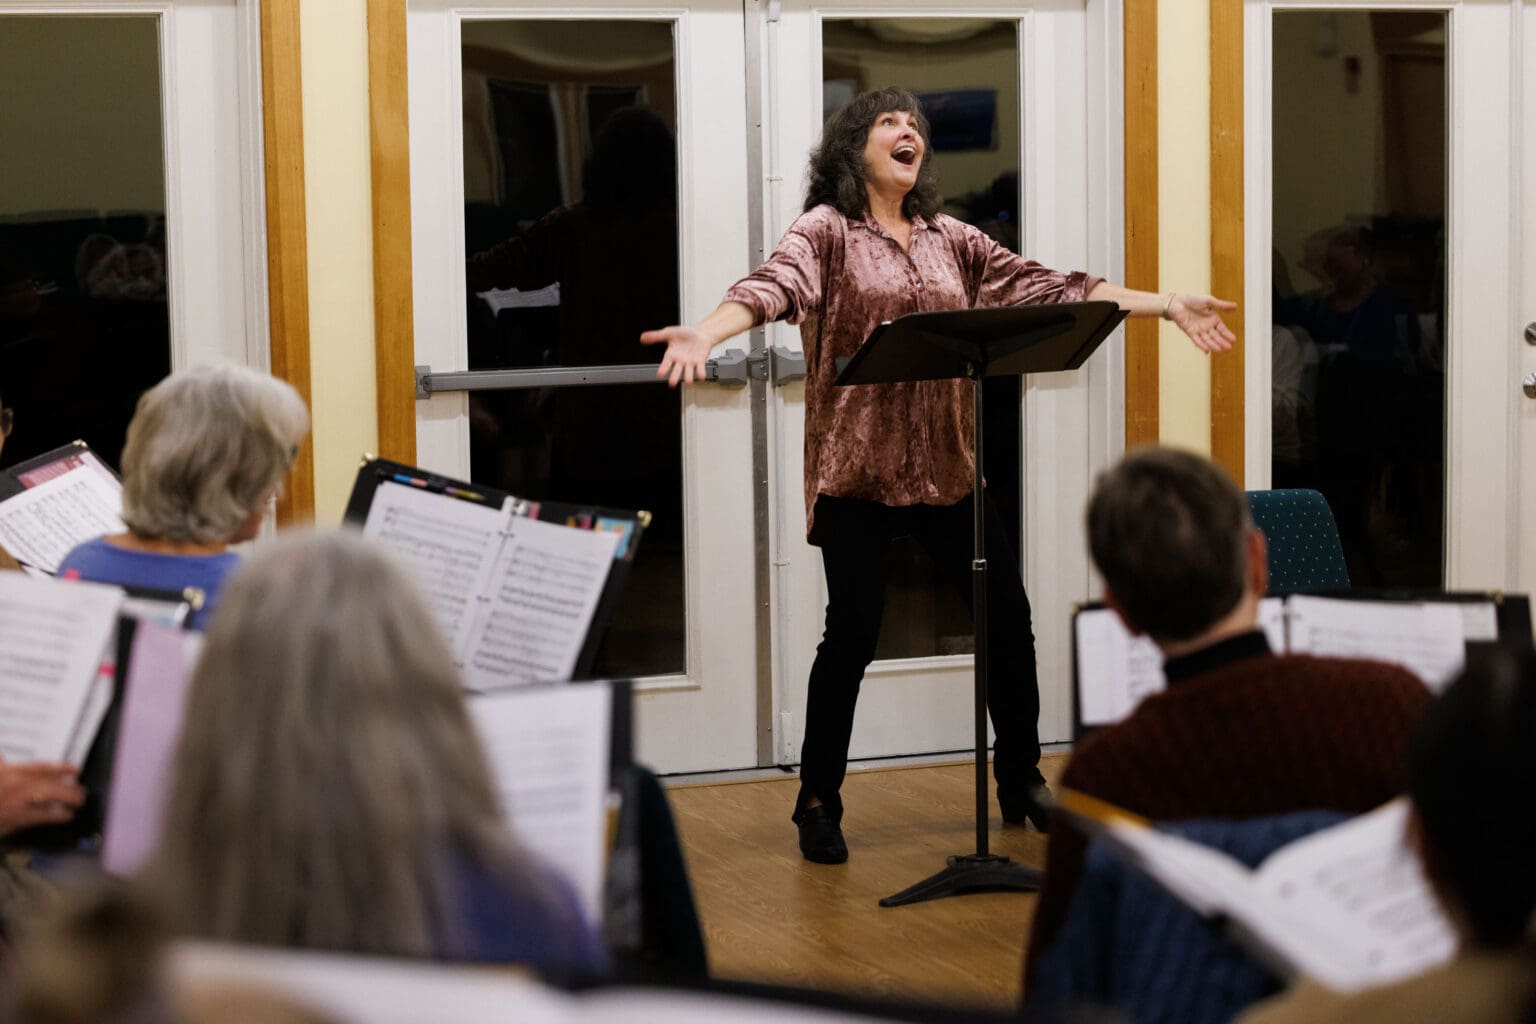 Artistic Director Wendy Bloom smiles enthusiastically as she directs singers with the Vox Pacifica choir during practice on Nov. 16 in Bellingham. The choir will perform its seasonal offering